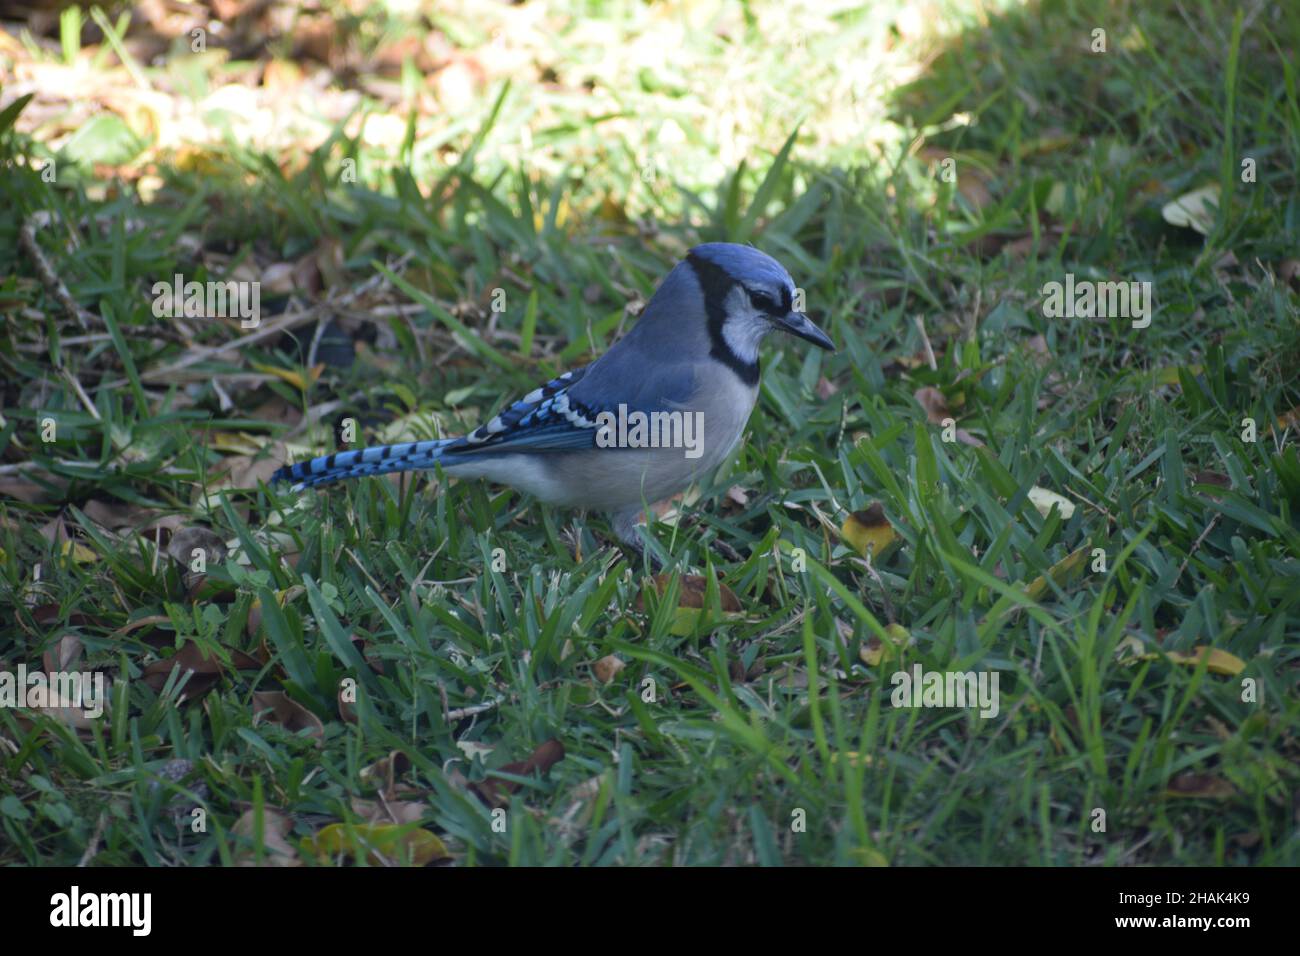 A Bluejay stands in a shaded lawn. Stock Photo